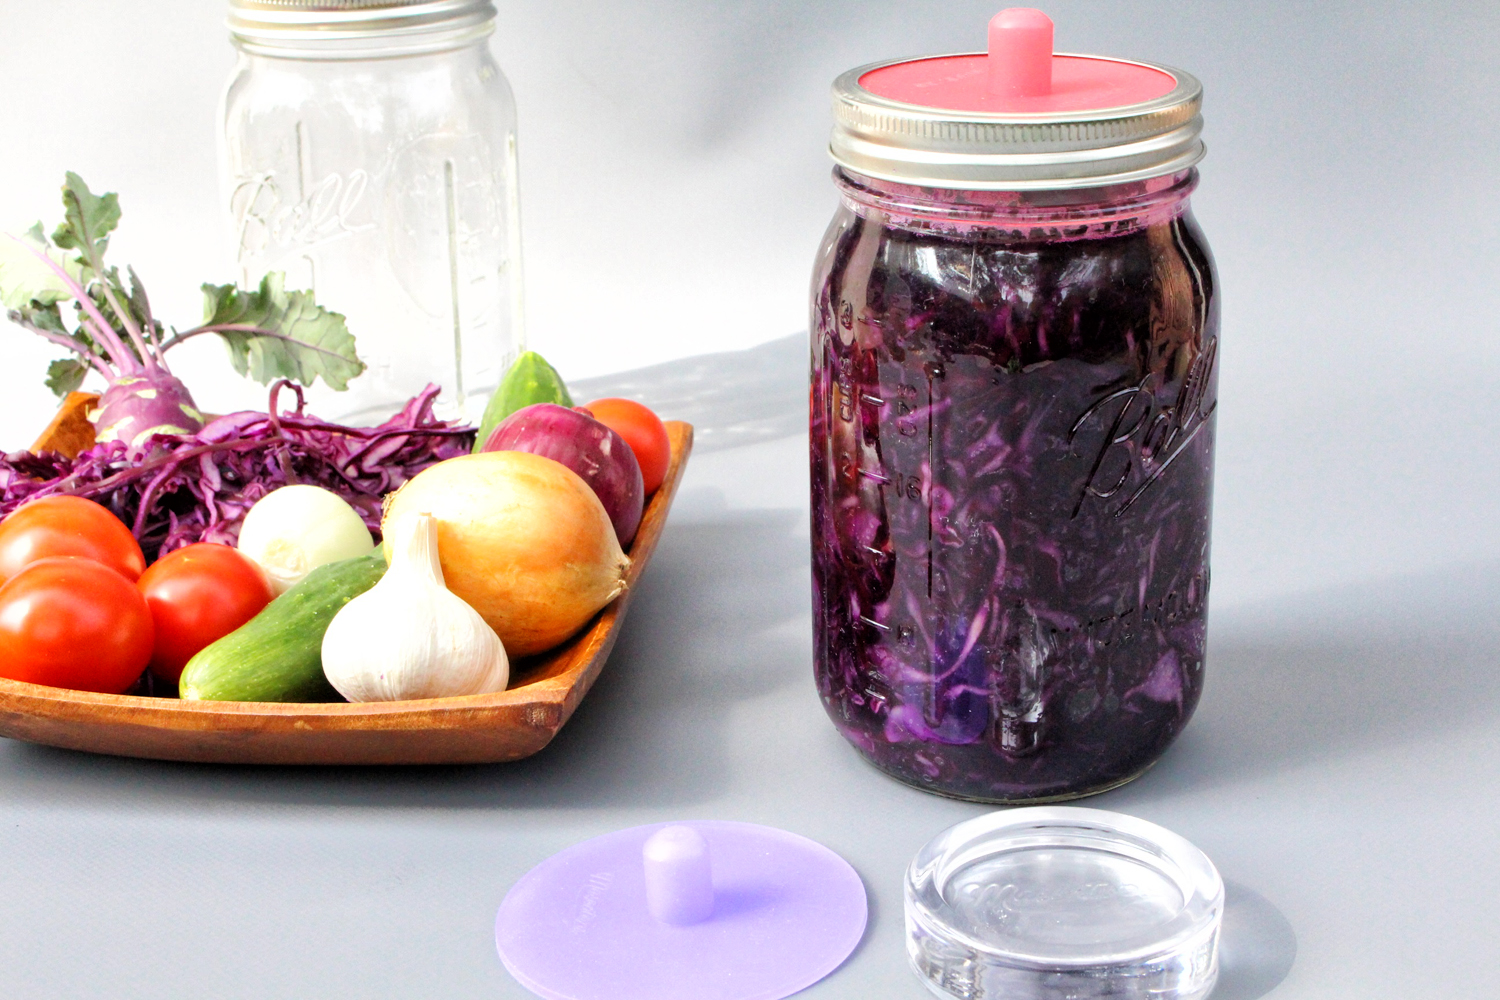 Complete Fermentation Kit for Vegetables - The Easiest Way To Ferment 